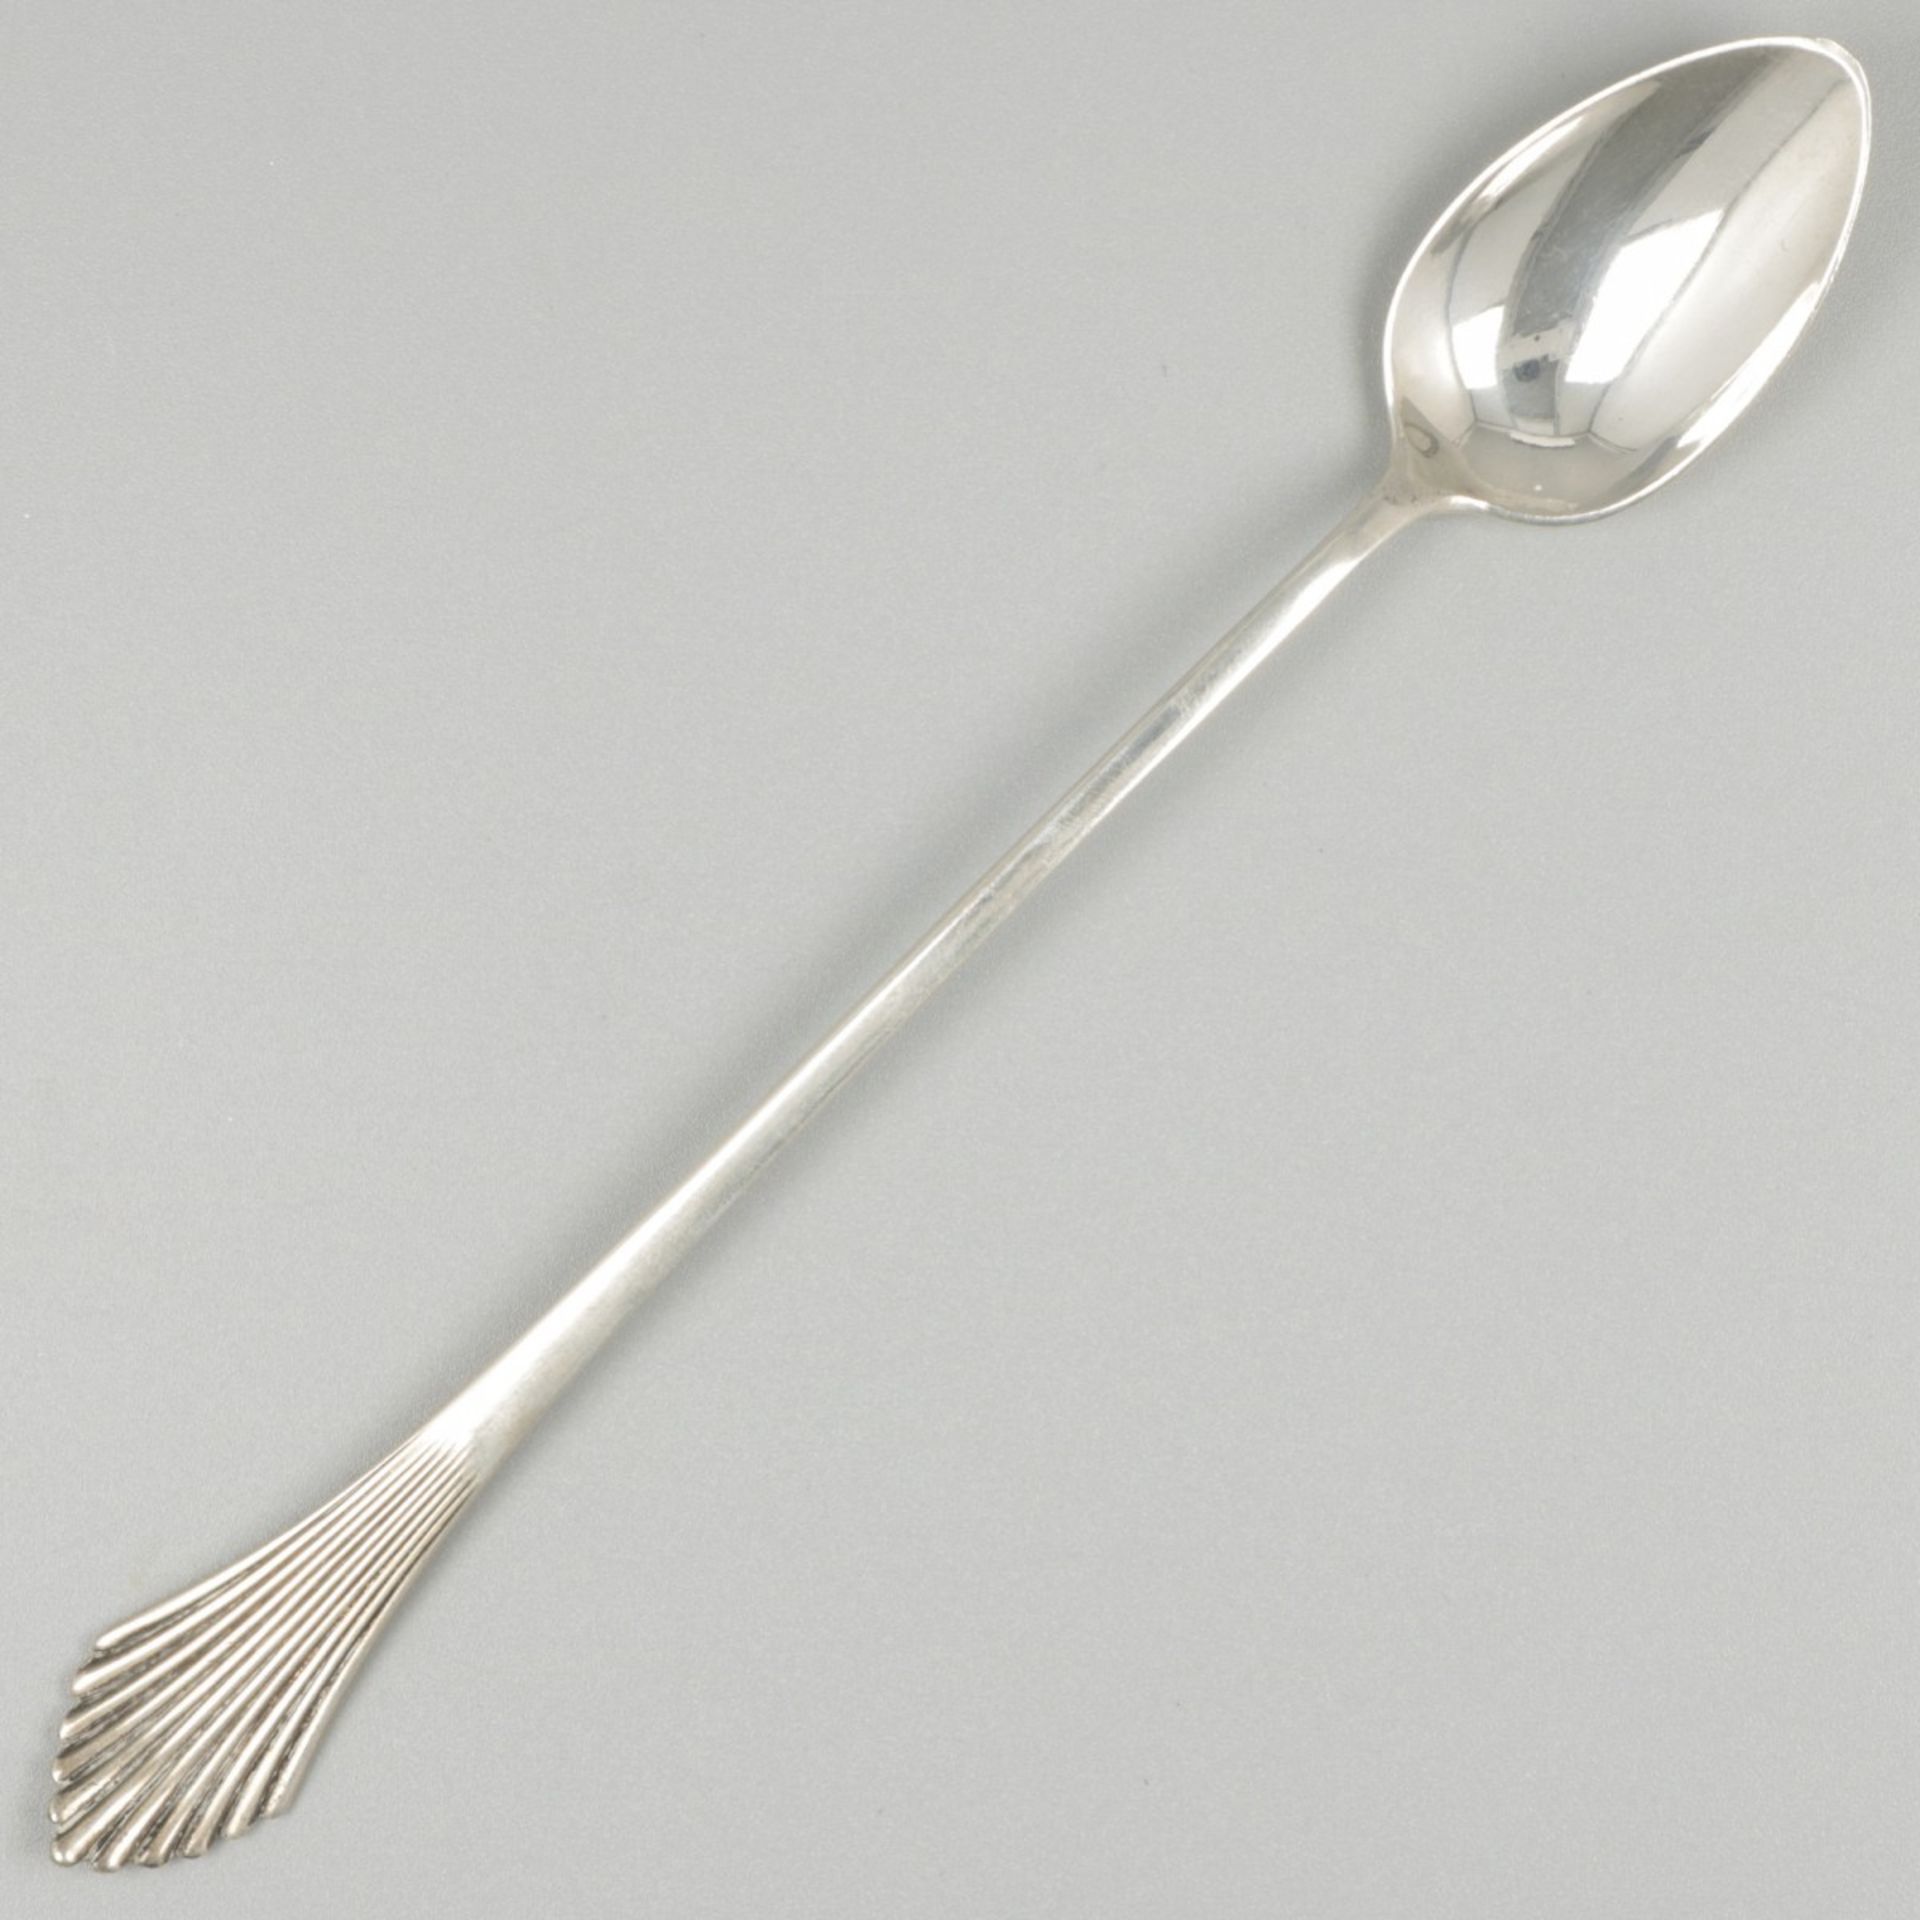 8-piece set of ice cream spoons silver. - Image 3 of 6